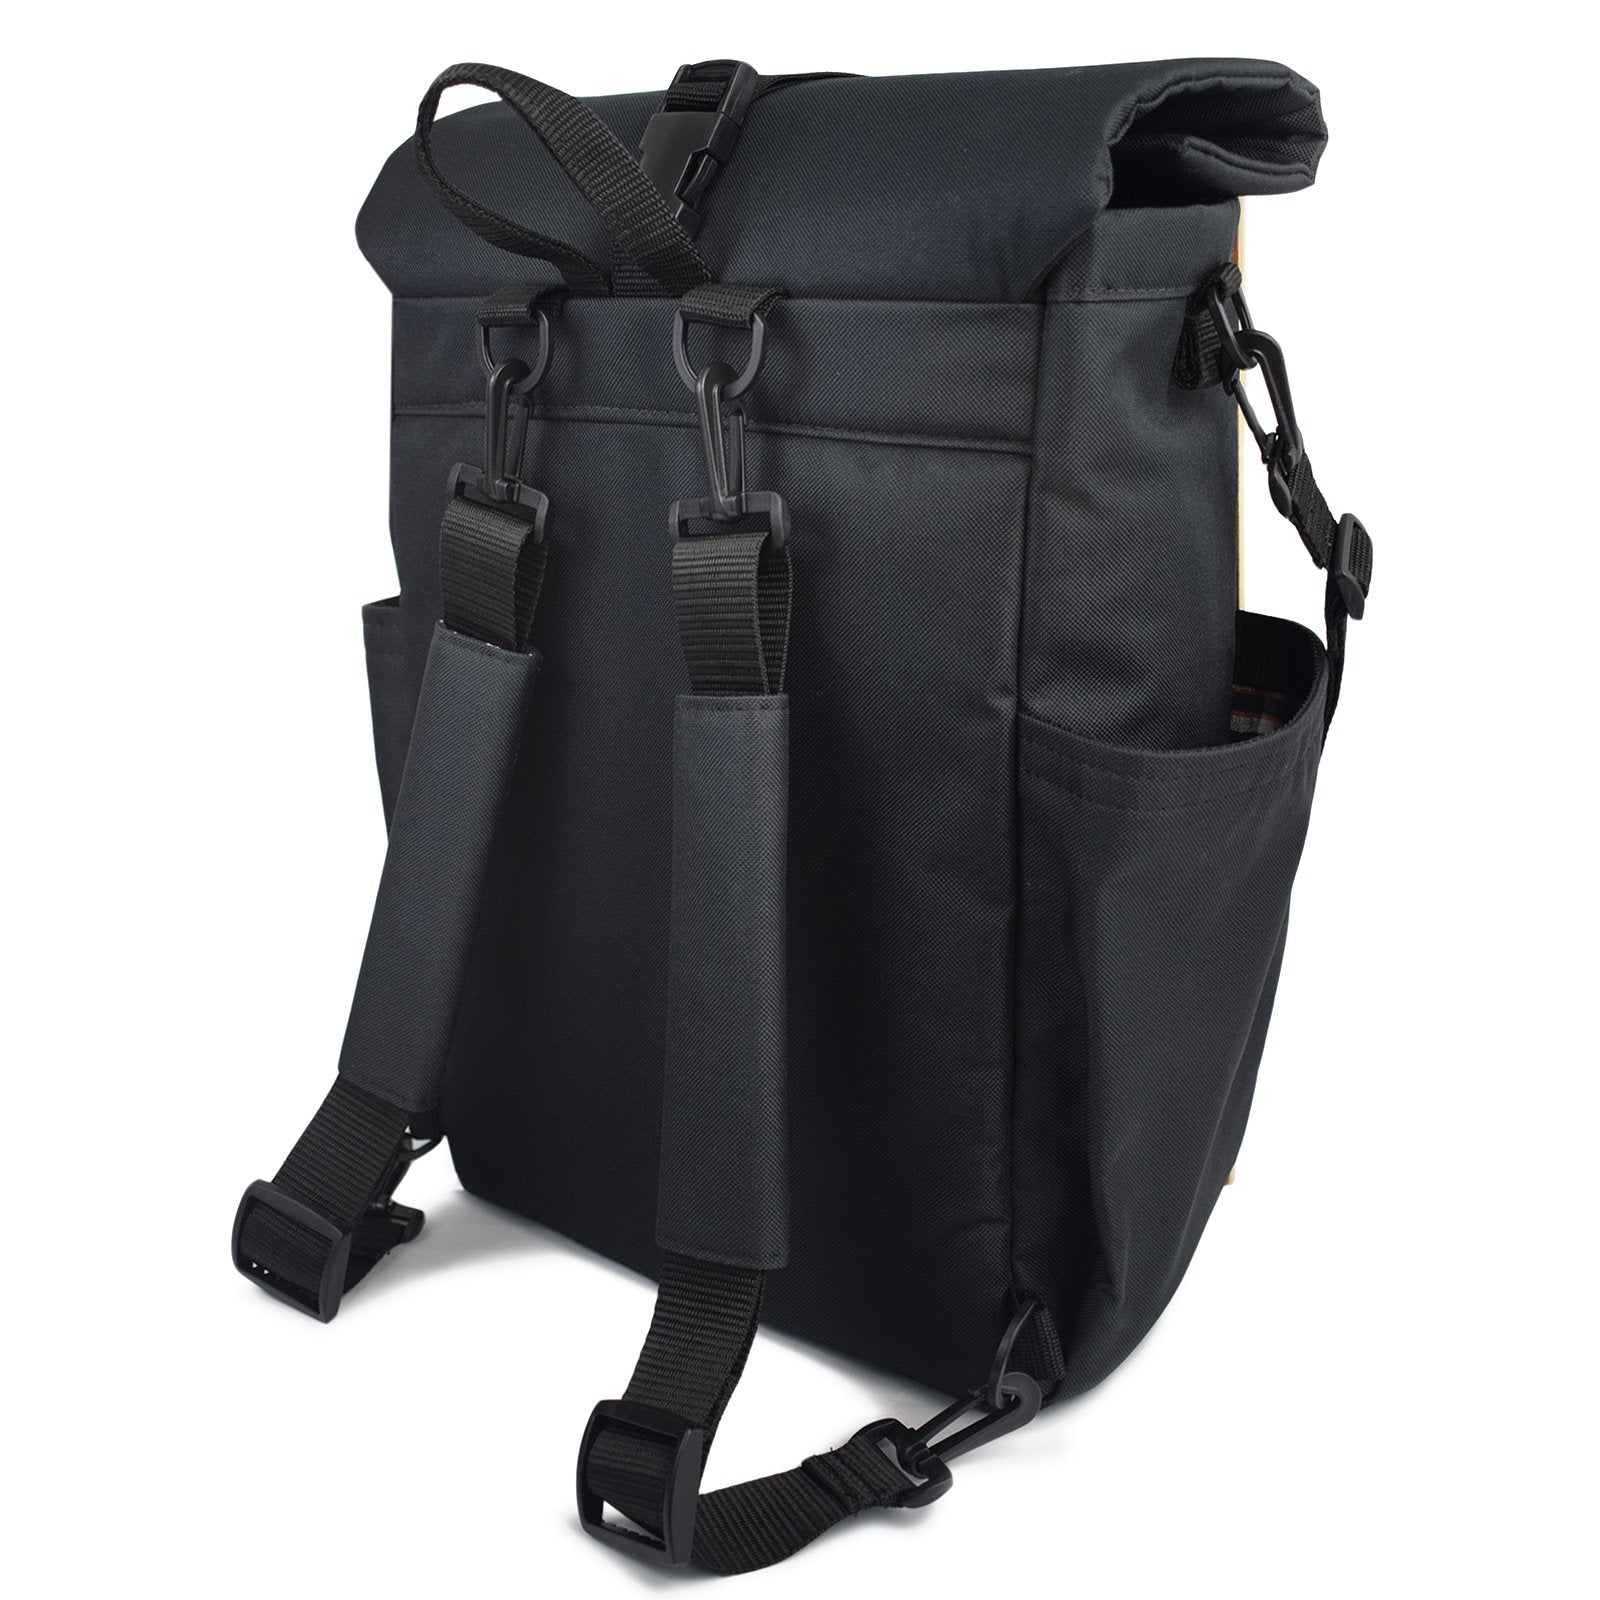 back view of backpack with shoulder straps